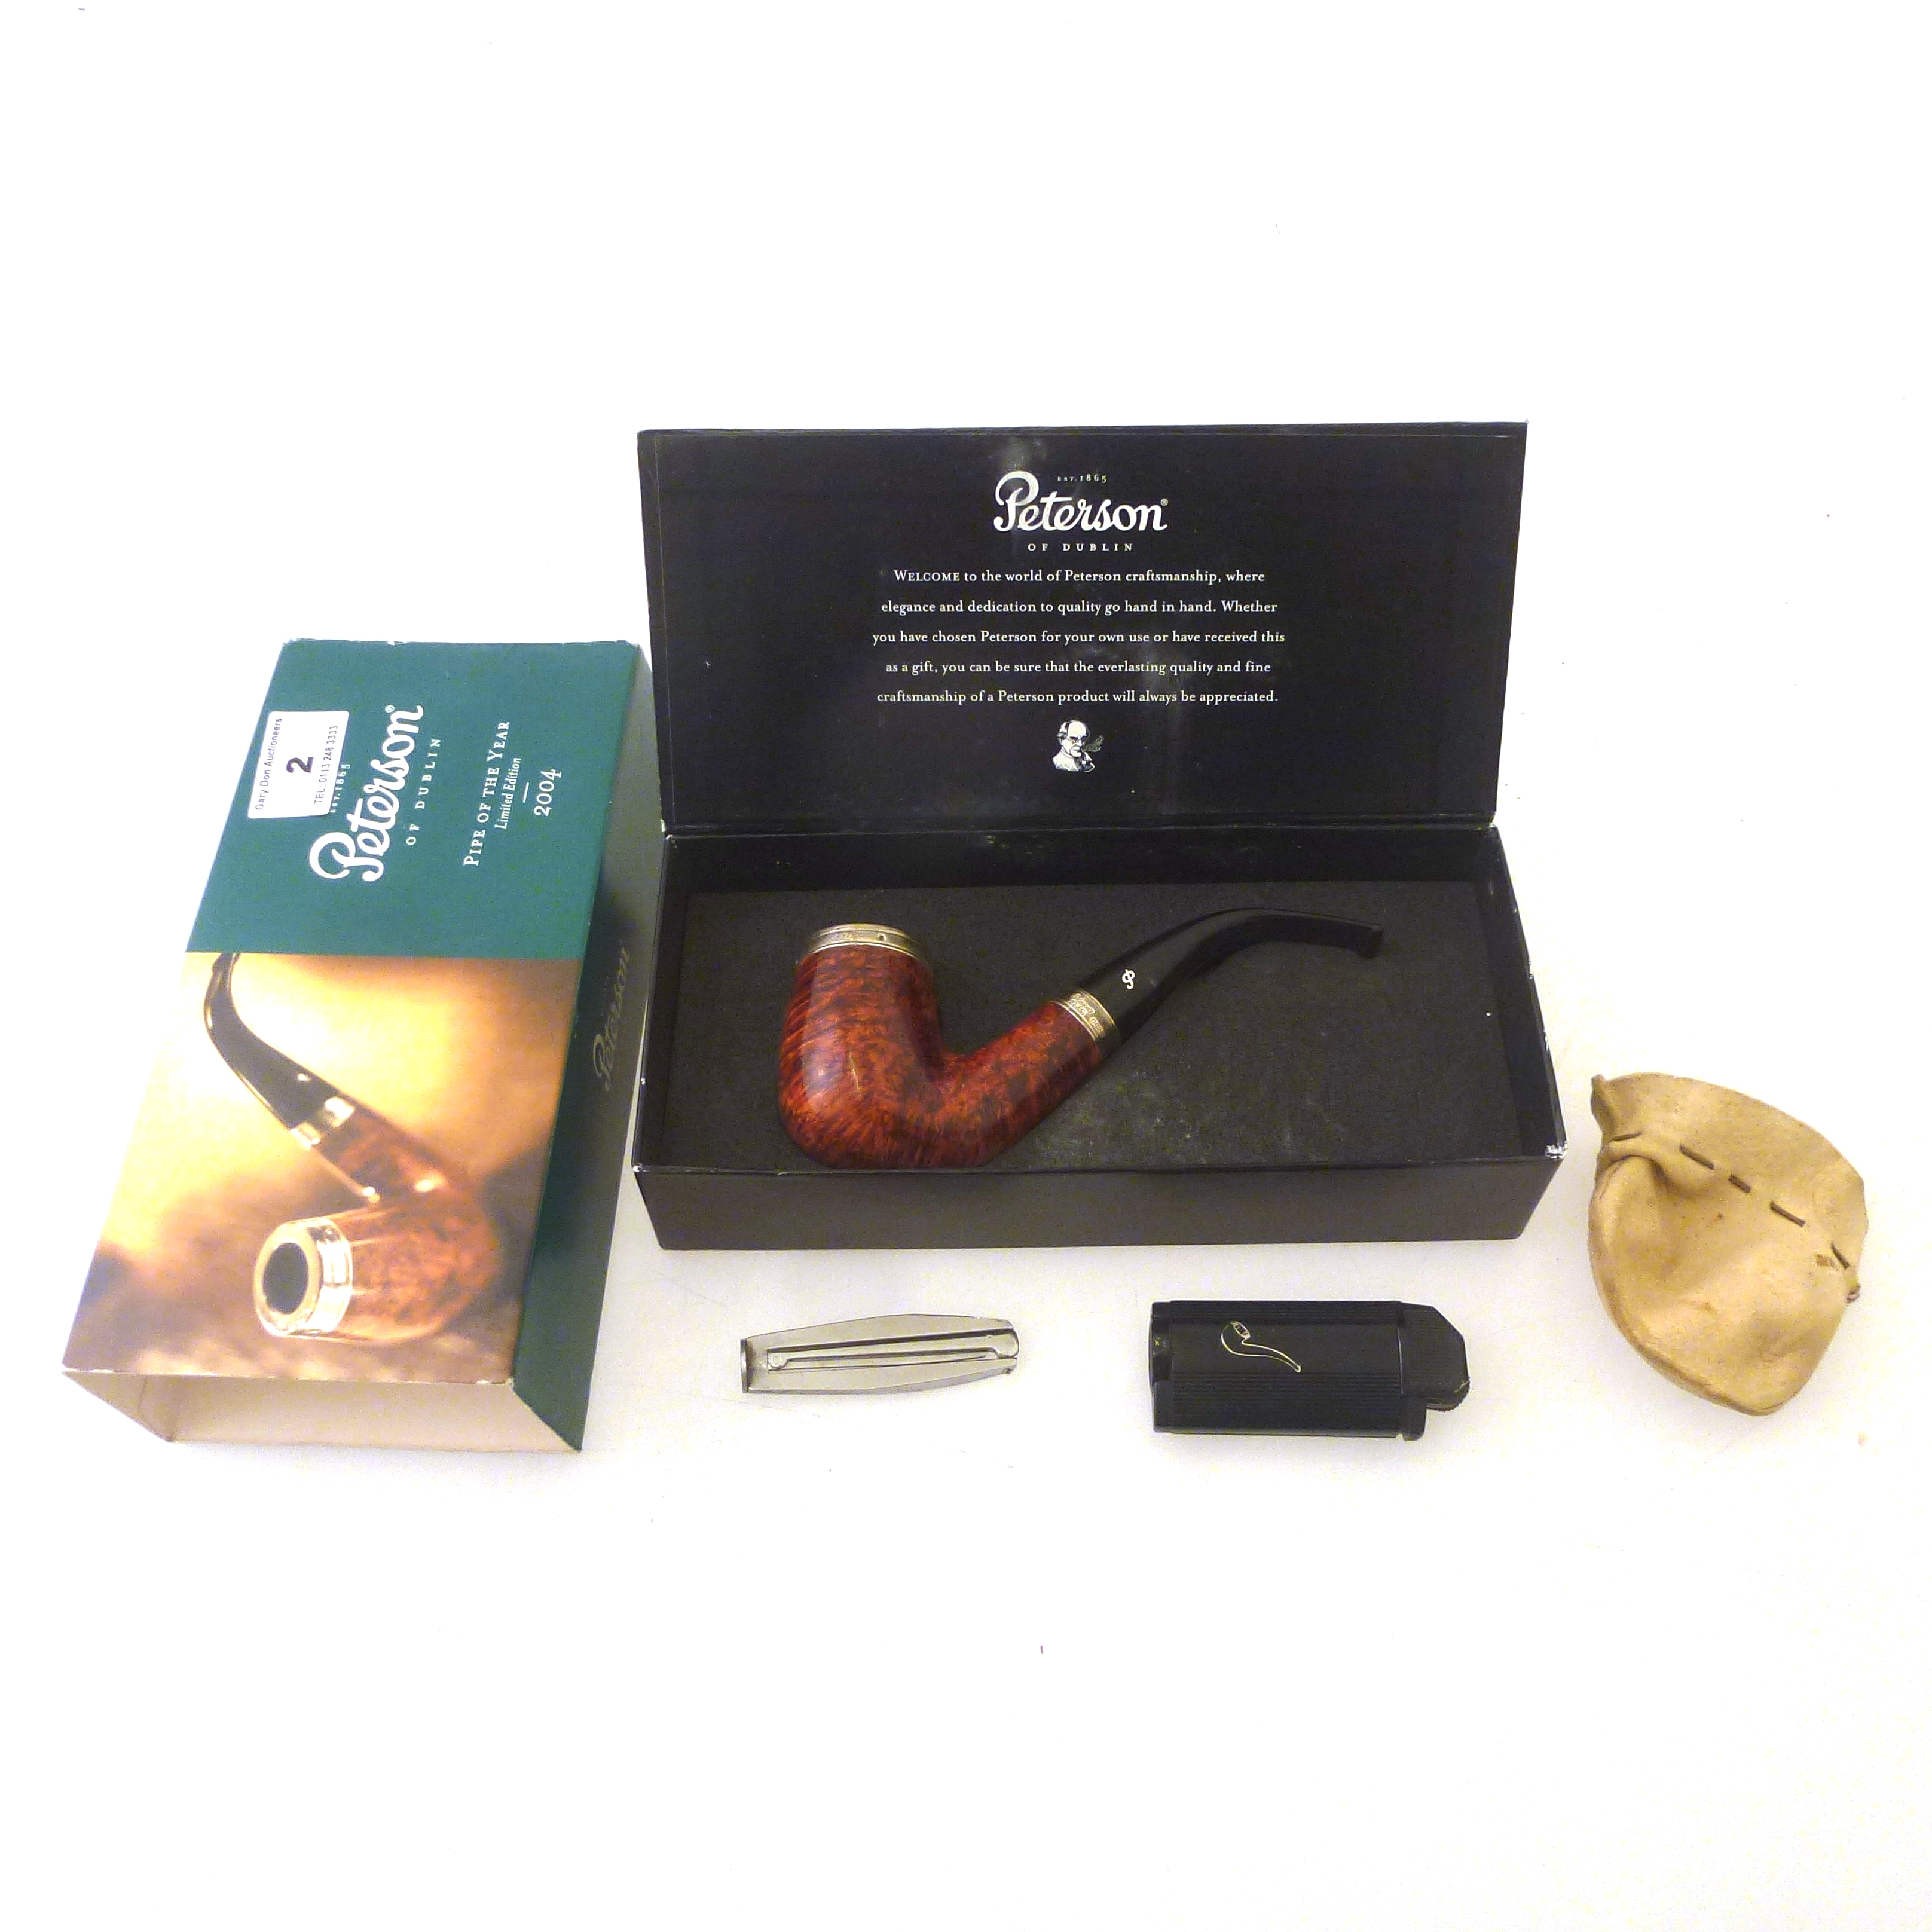 BOXED PETERSON PIPE OF THE YEAR LIMITED EDITION 2004 PIPE 321/1000 WITH SILVER RIMS - Image 2 of 4